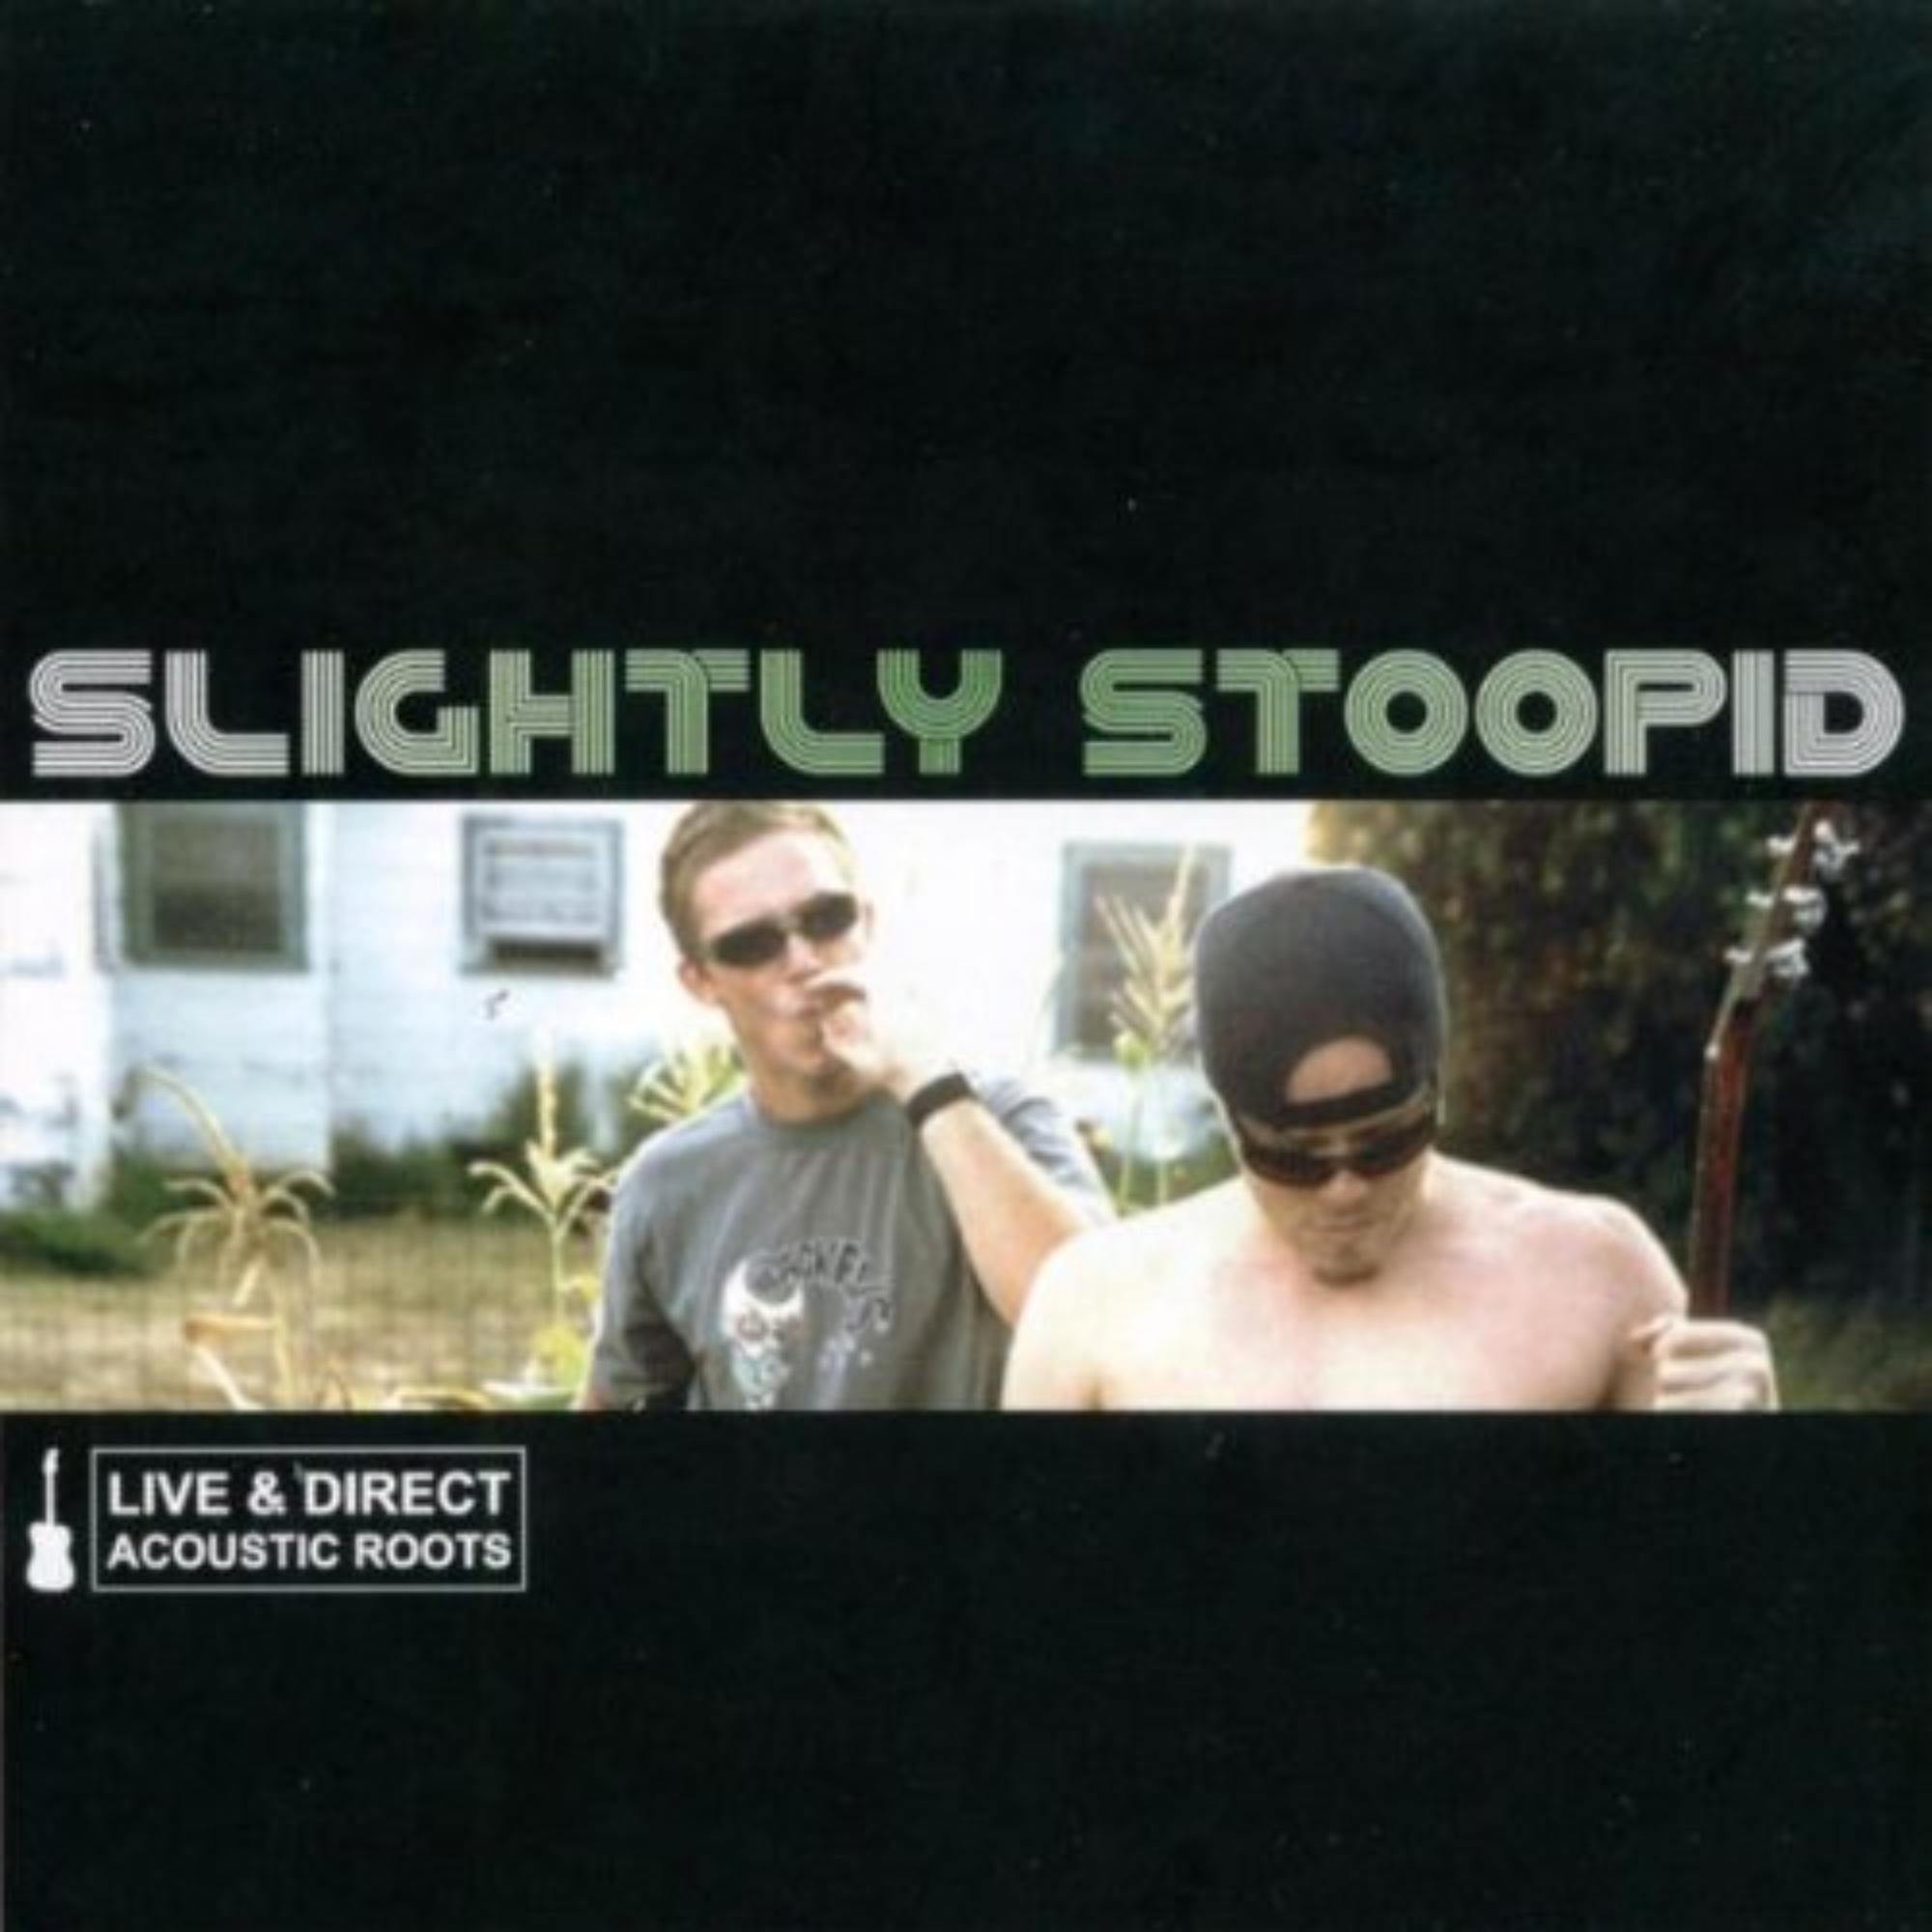 Slightly Stoopid - Live & Direct: Acoustic Roots - New LP Record 2020 Stoopid Records Vinyl - Reggae / Acoustic